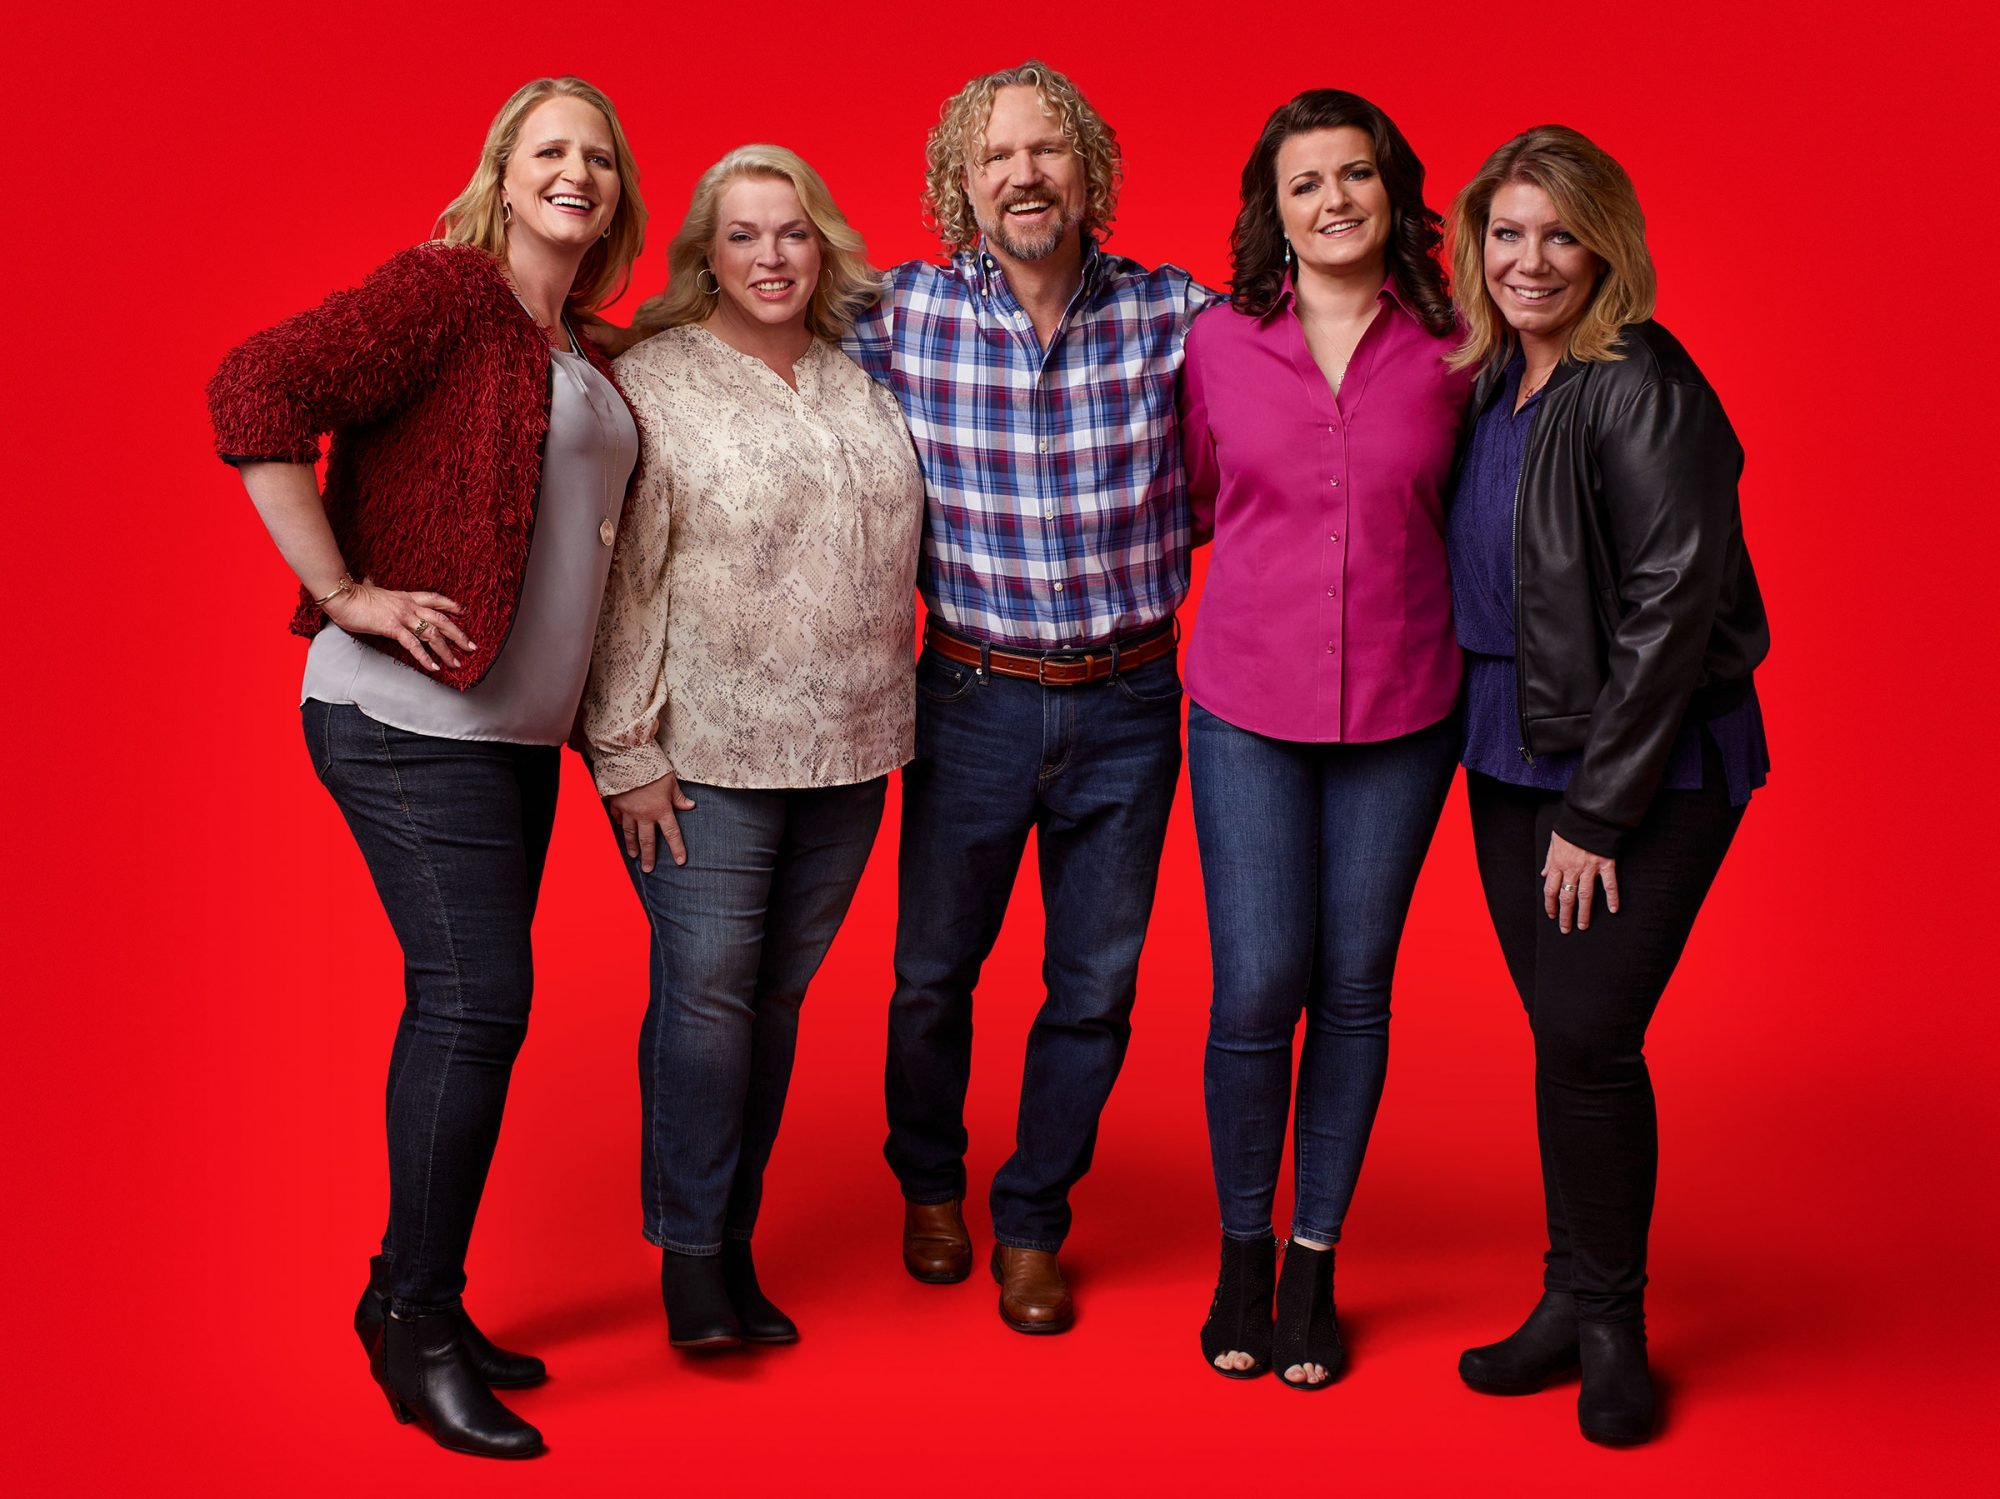 Christine Brown, Janelle Brown, Kody Brown, Robyn Brown, and Meri Brown standing together in front of a red background on Sister Wives